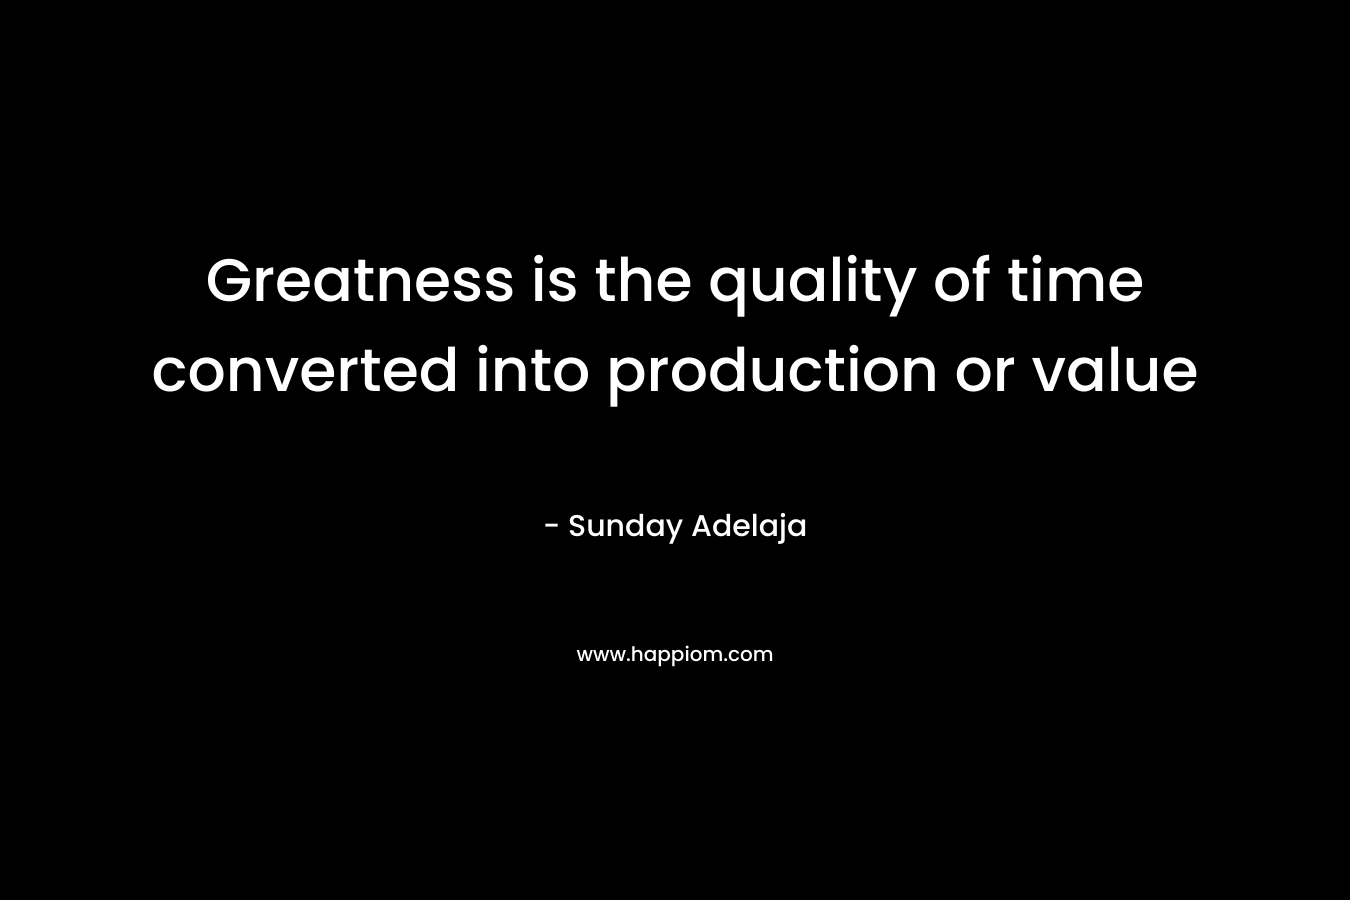 Greatness is the quality of time converted into production or value